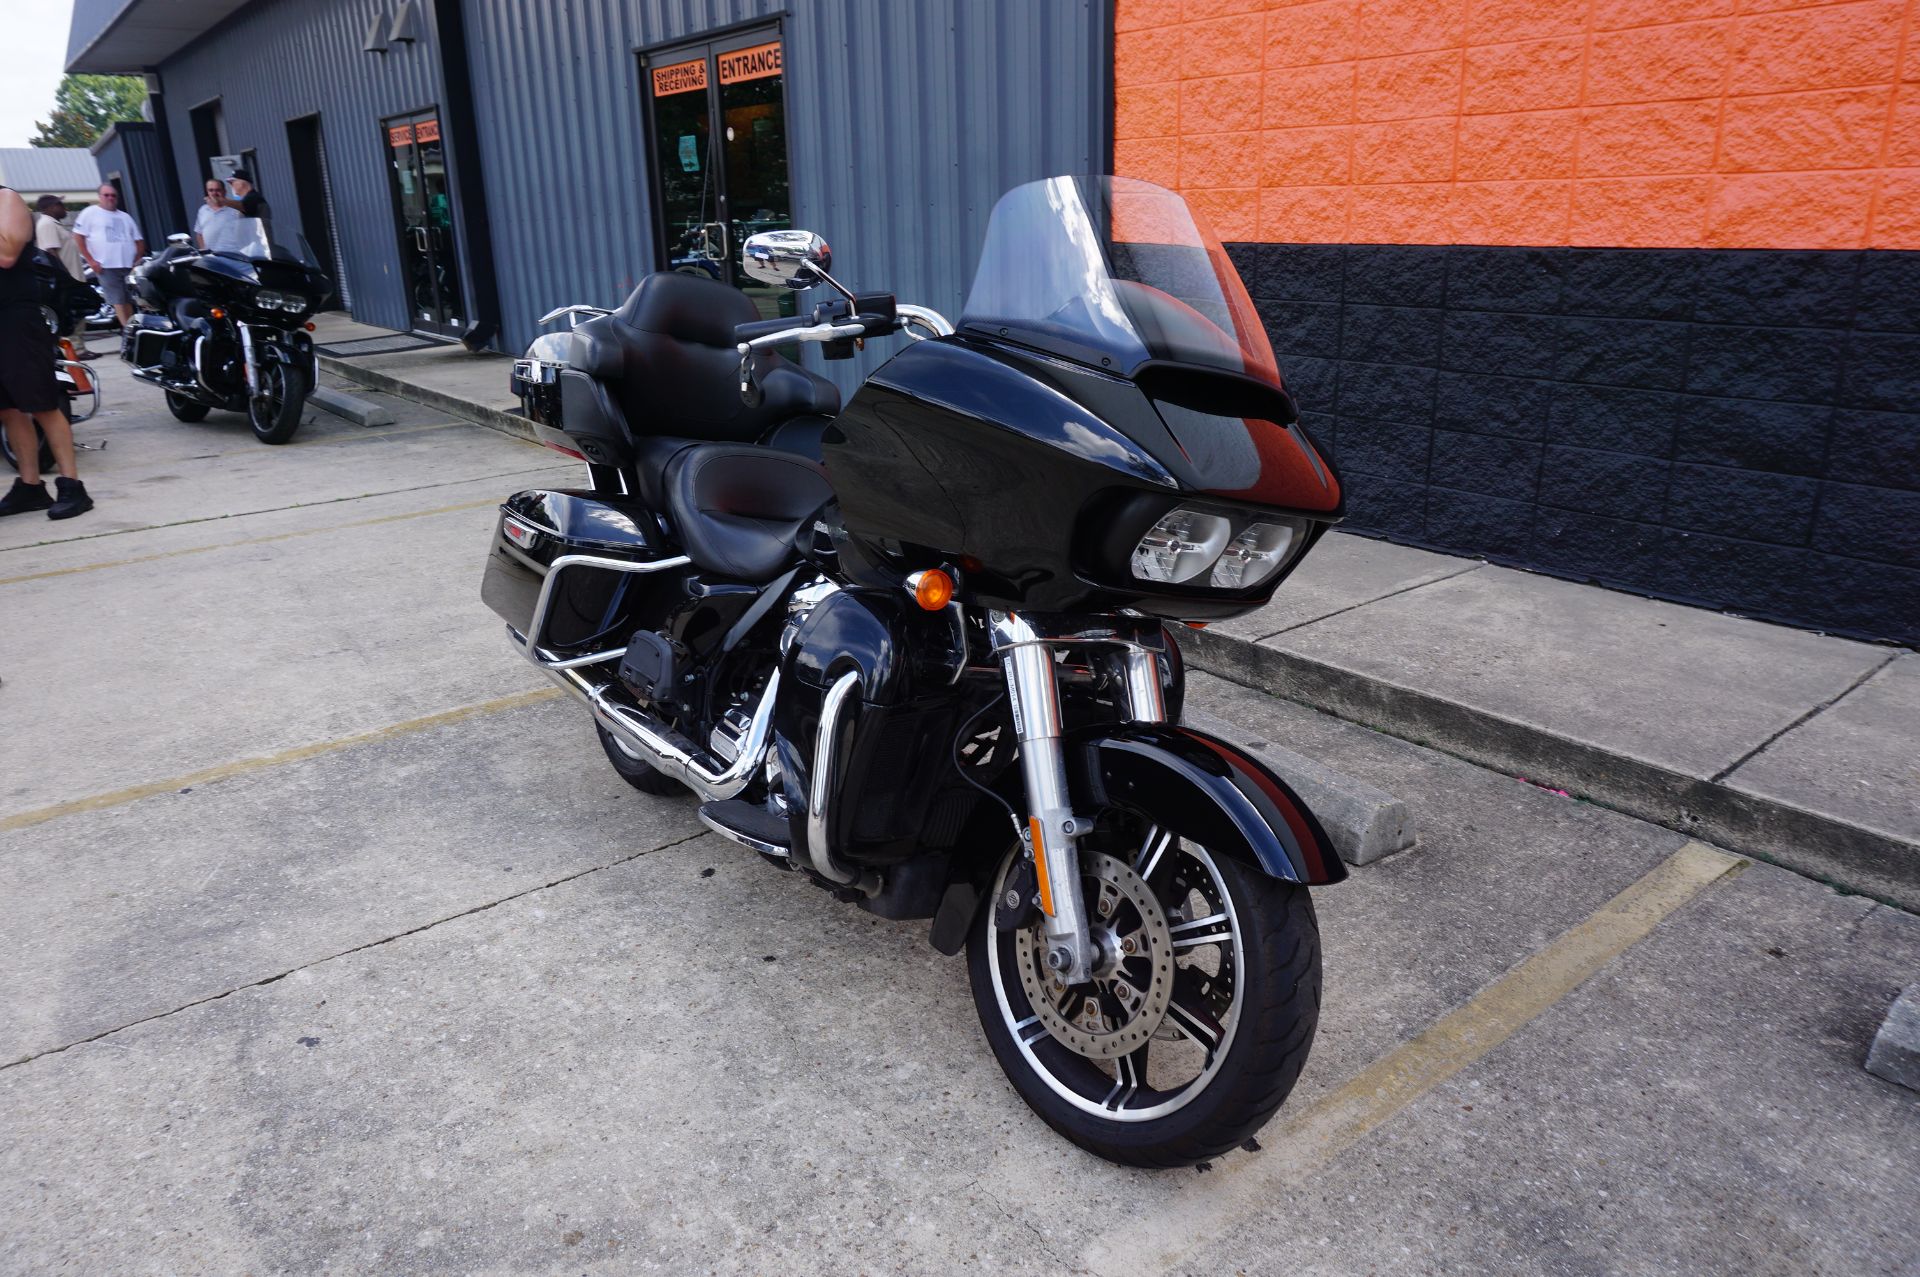 2021 Harley-Davidson Road Glide® Limited in Metairie, Louisiana - Photo 16